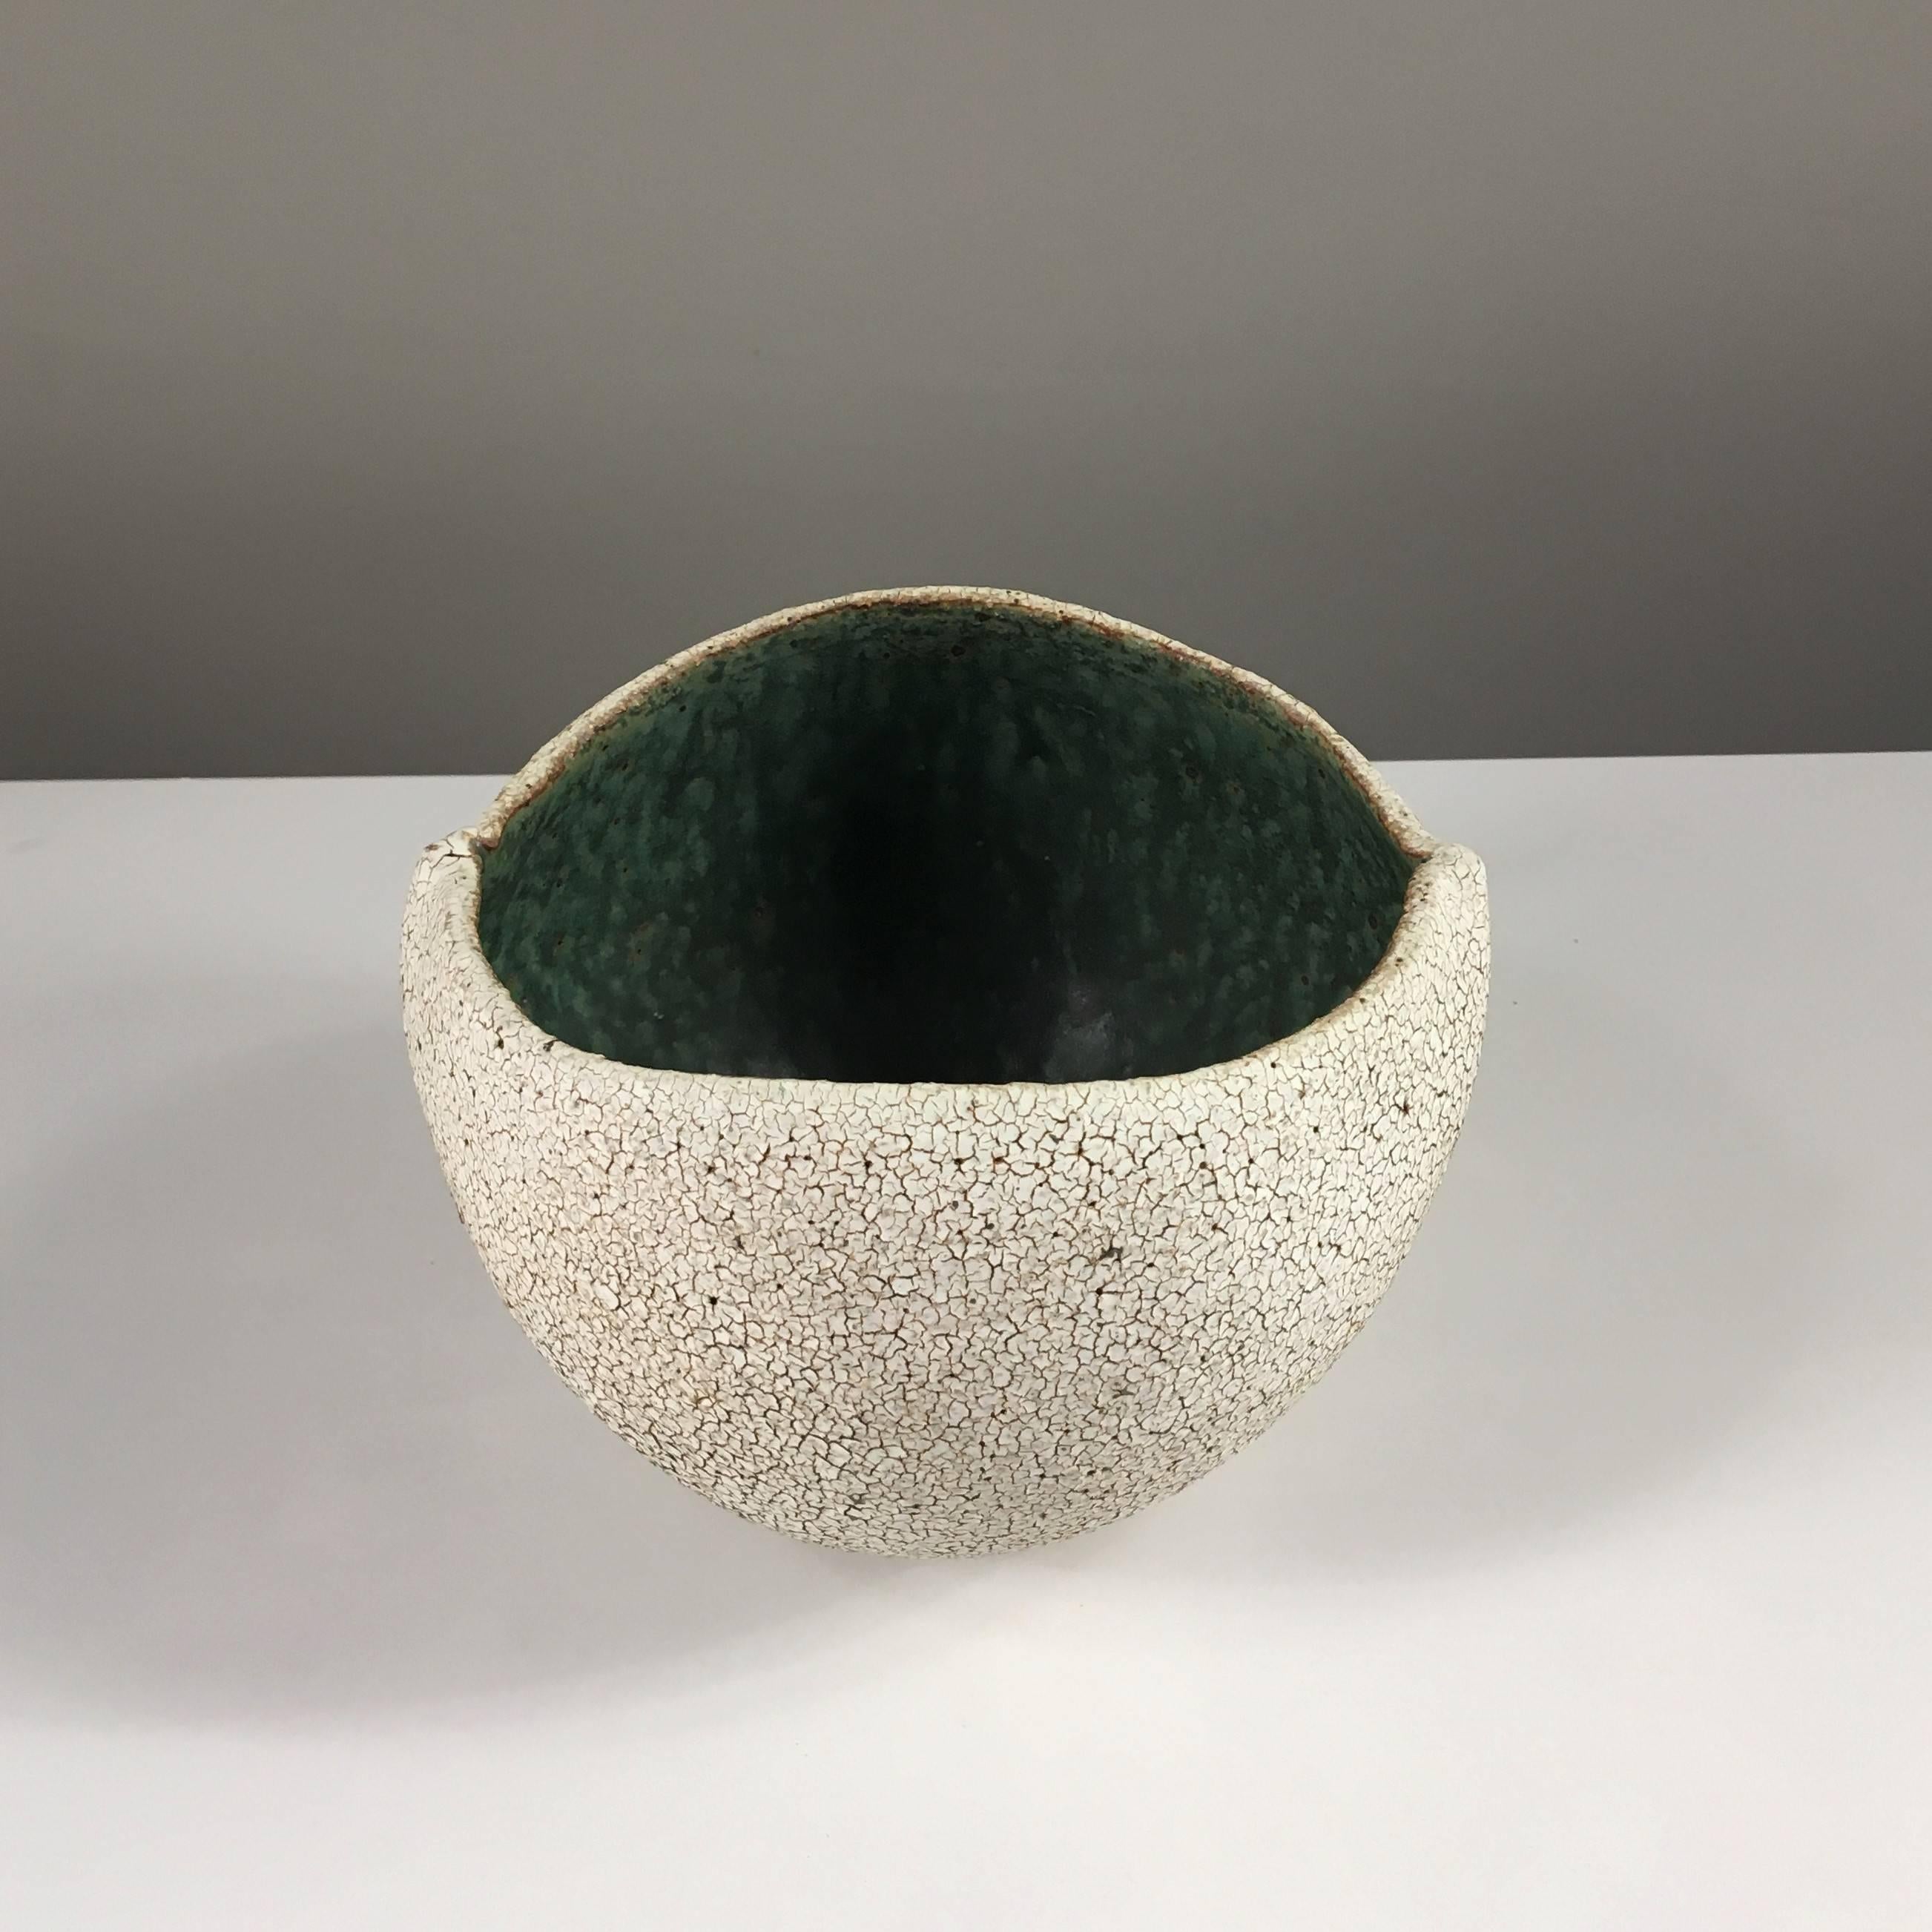 Contemporary ceramic artist Yumiko Kuga's glazed stoneware round bowl no. 170a is part of her Crackle Series. All of the pieces in this series are hand-built and 100% handmade so they are one-of-a-kind and thus vary slightly from one another. All